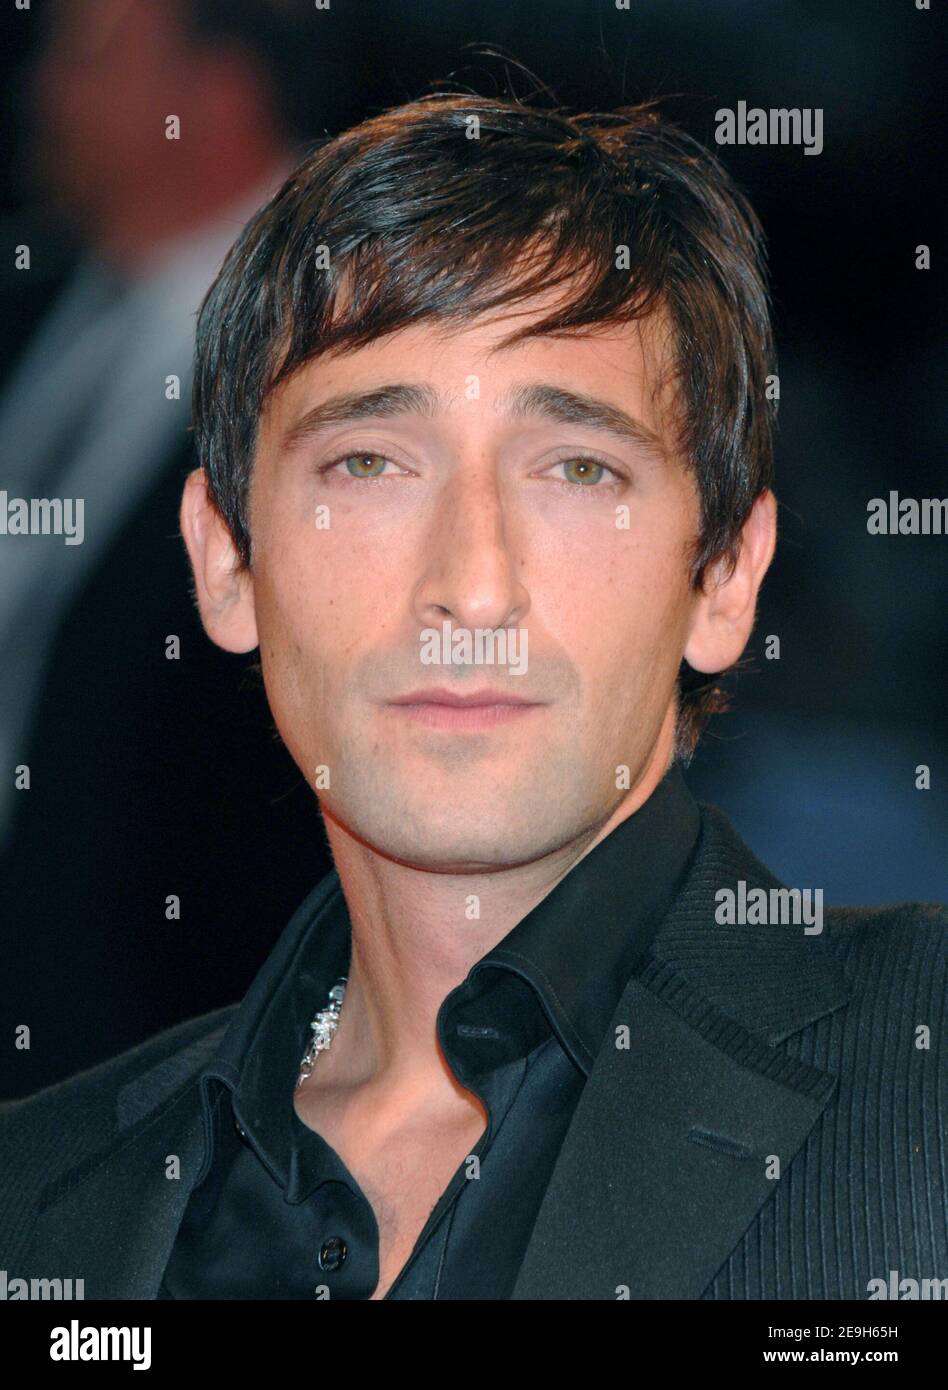 Actor Adrien Brody, a cast member in the motion picture dramatic comedy  The Darjeeling Limited, arrives for the premiere of the film at the  Academy of Motion Picture Arts & Sciences in